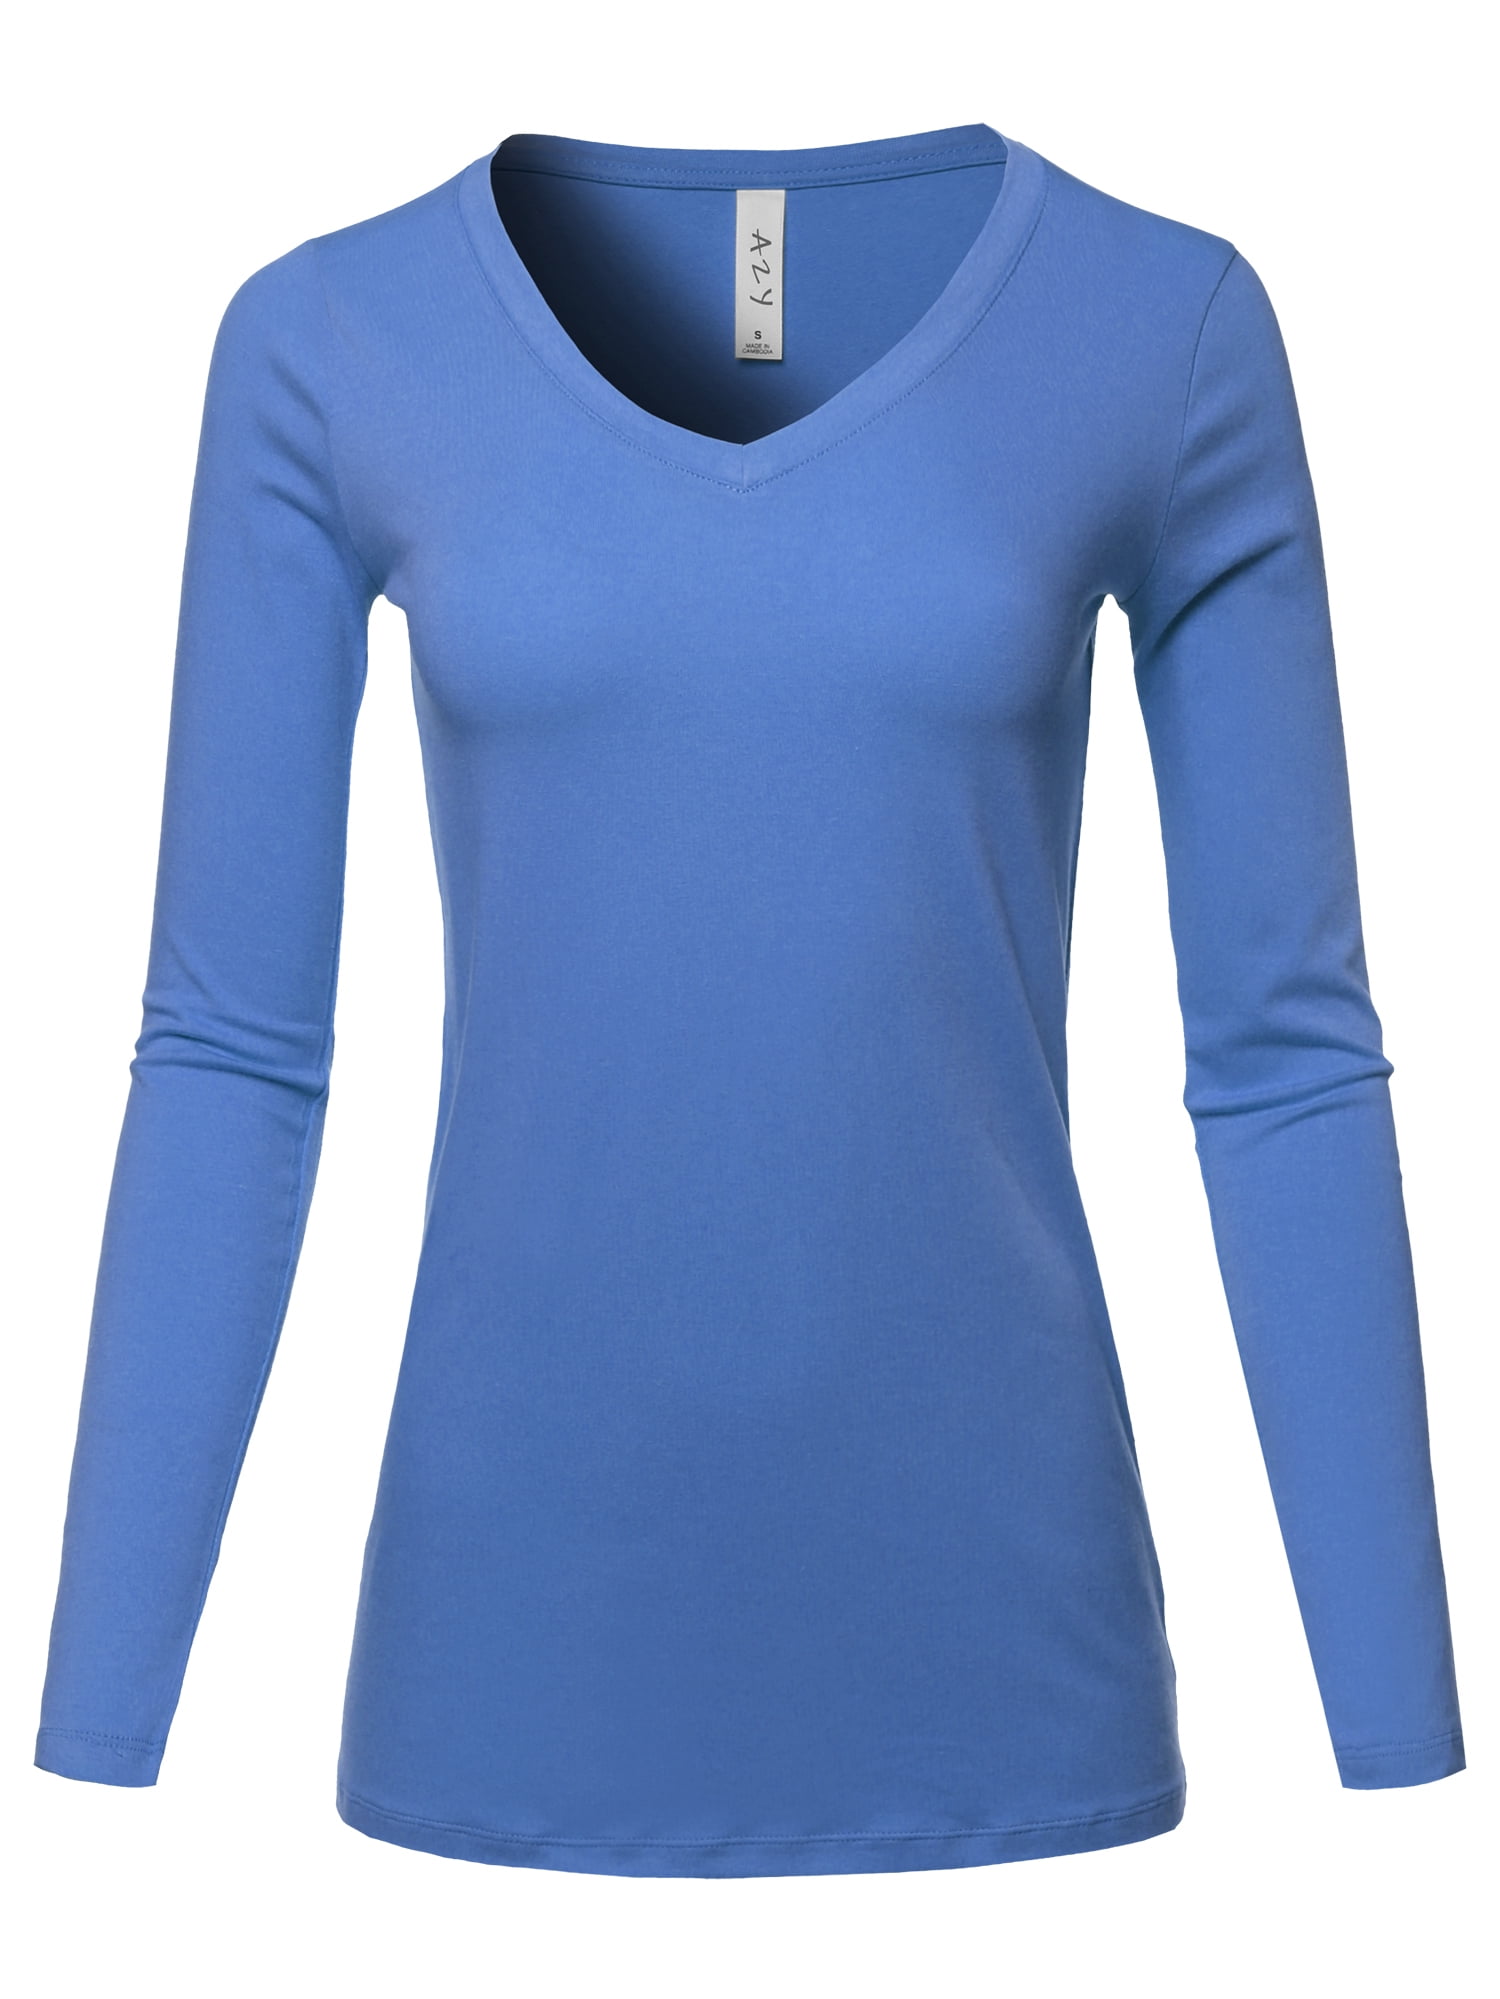 A2y Womens Basic Solid Soft Cotton Long Sleeve V Neck Top T Shirt Blue Mist M 